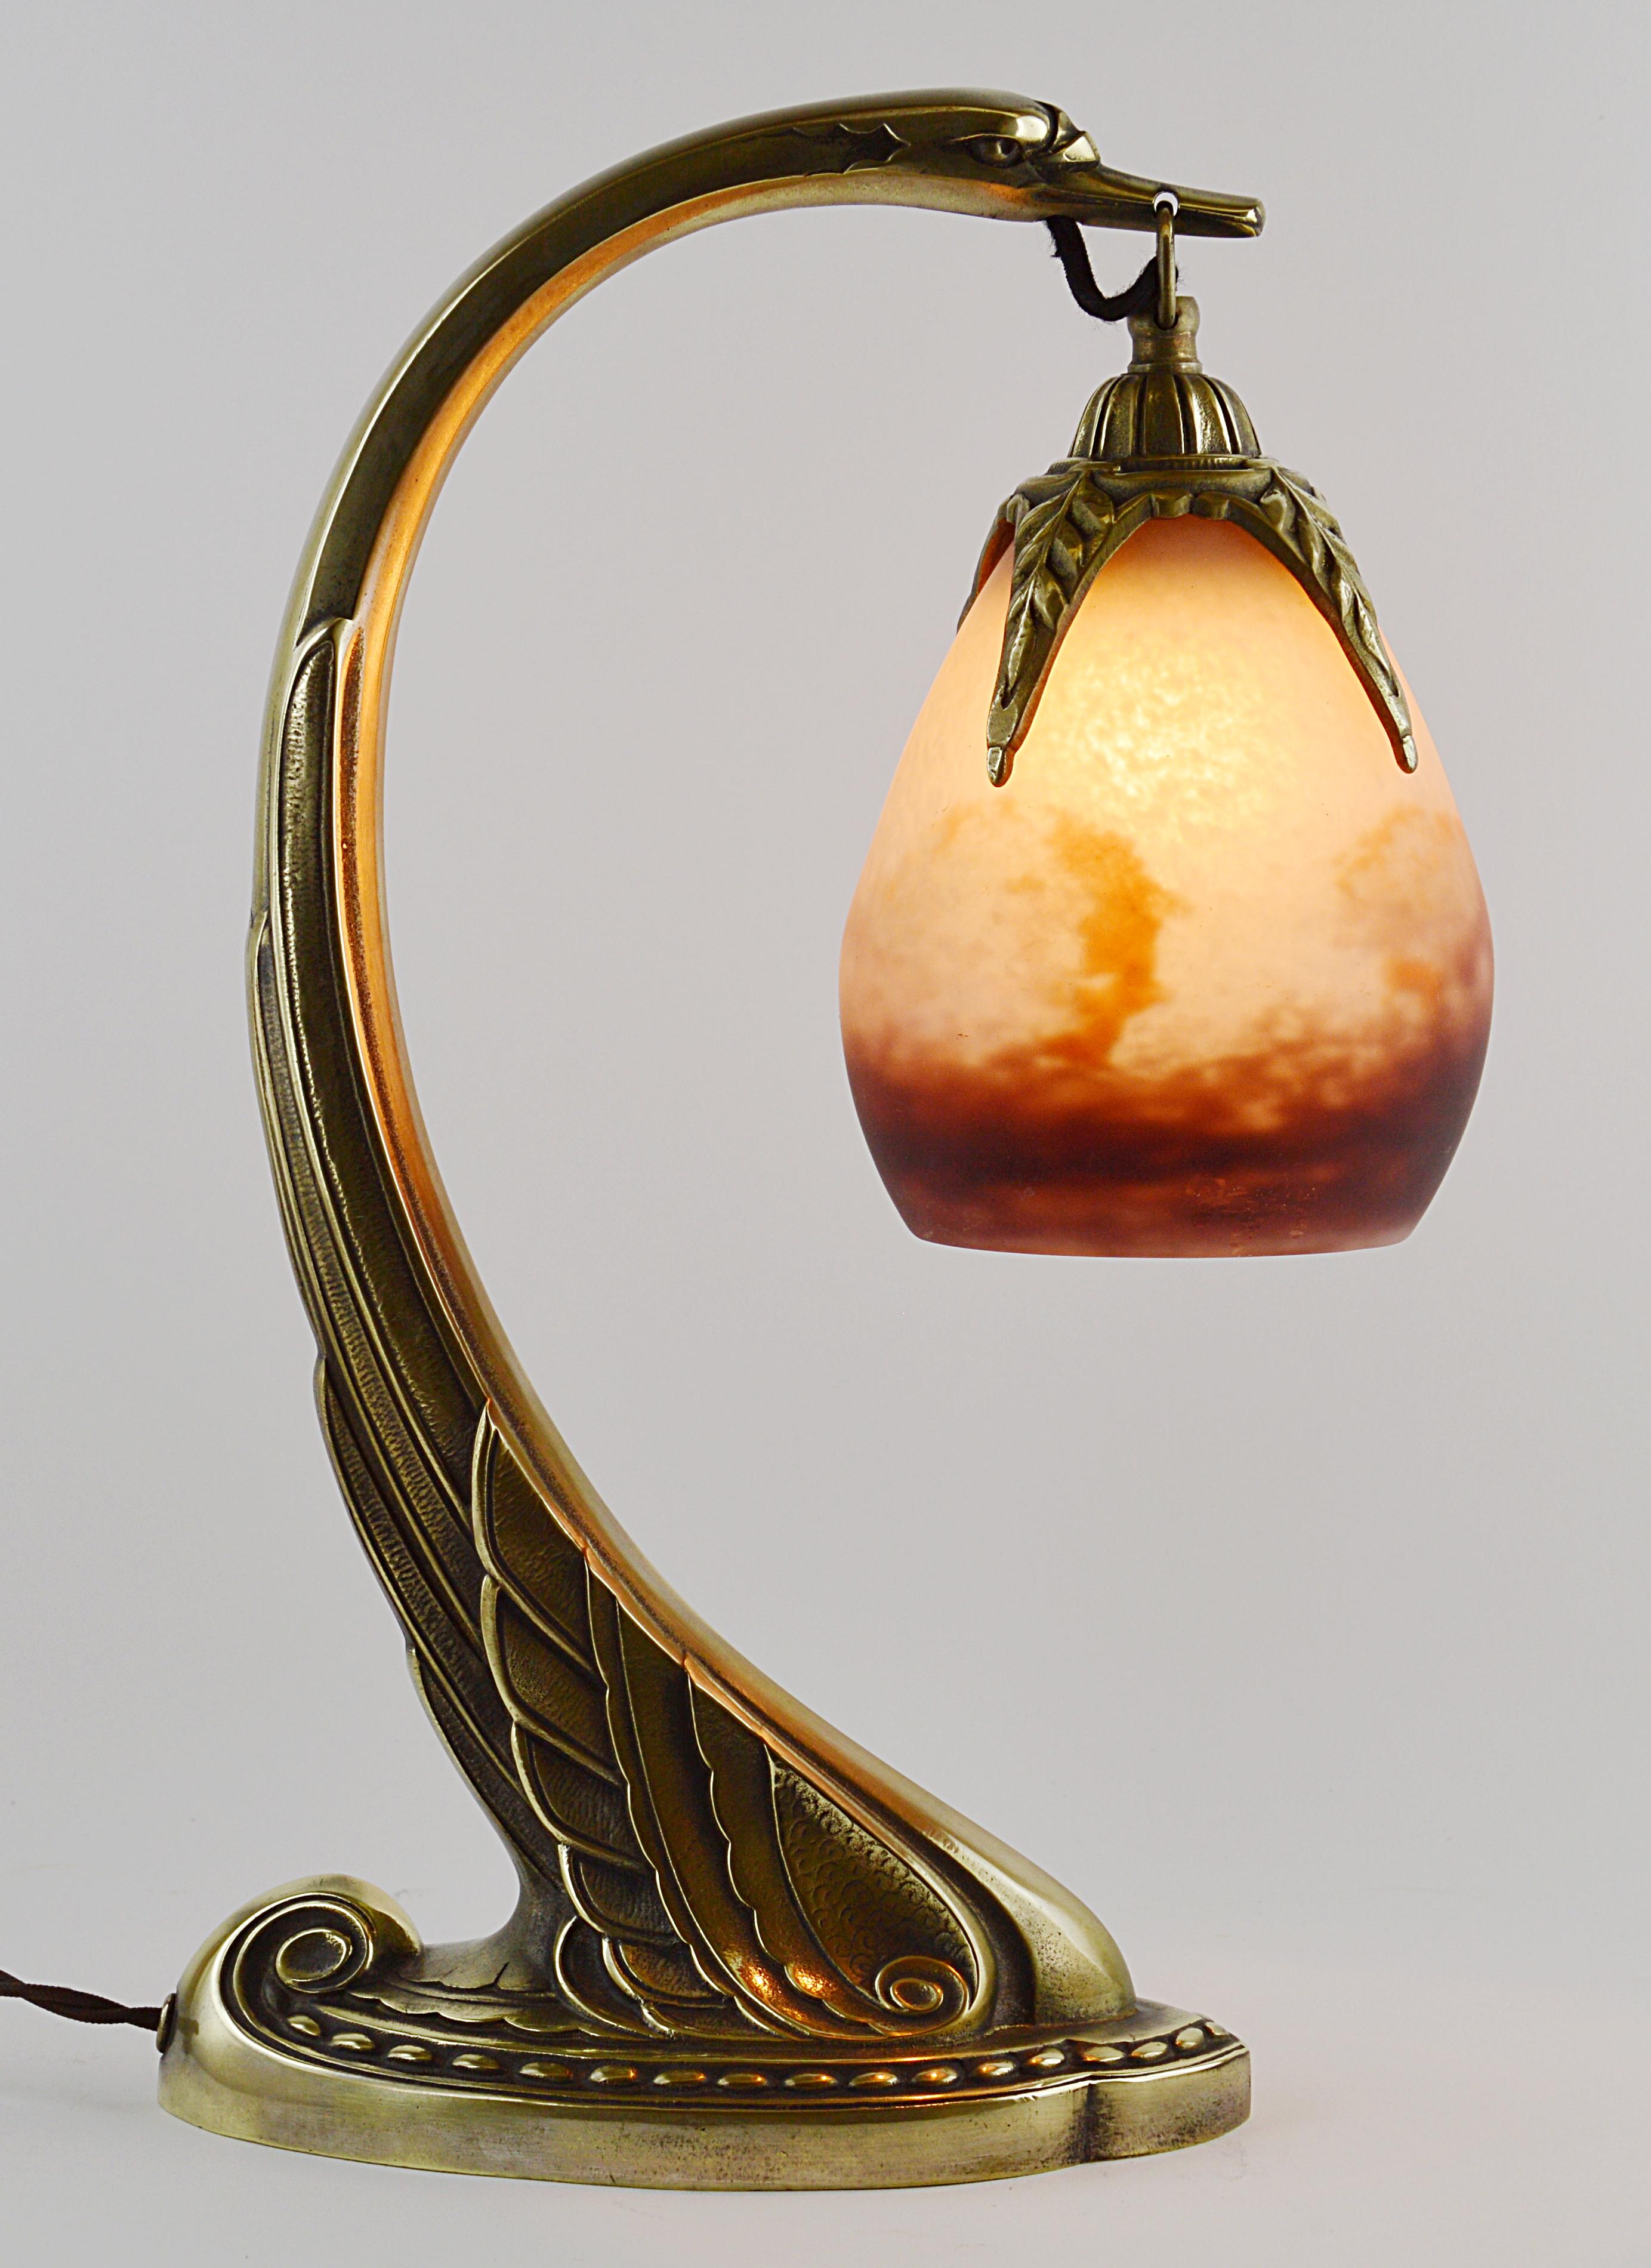 French Art Deco table or desk lamp by Degue(Compiègne) and Charles Ranc (Paris), France, ca.1925. Blown double glass shade by Degue hung at its bronze swan base by Charles Ranc. Colors: purple, white and ochre. Dimensions: 14.2 in. H x 3.9 in. W x